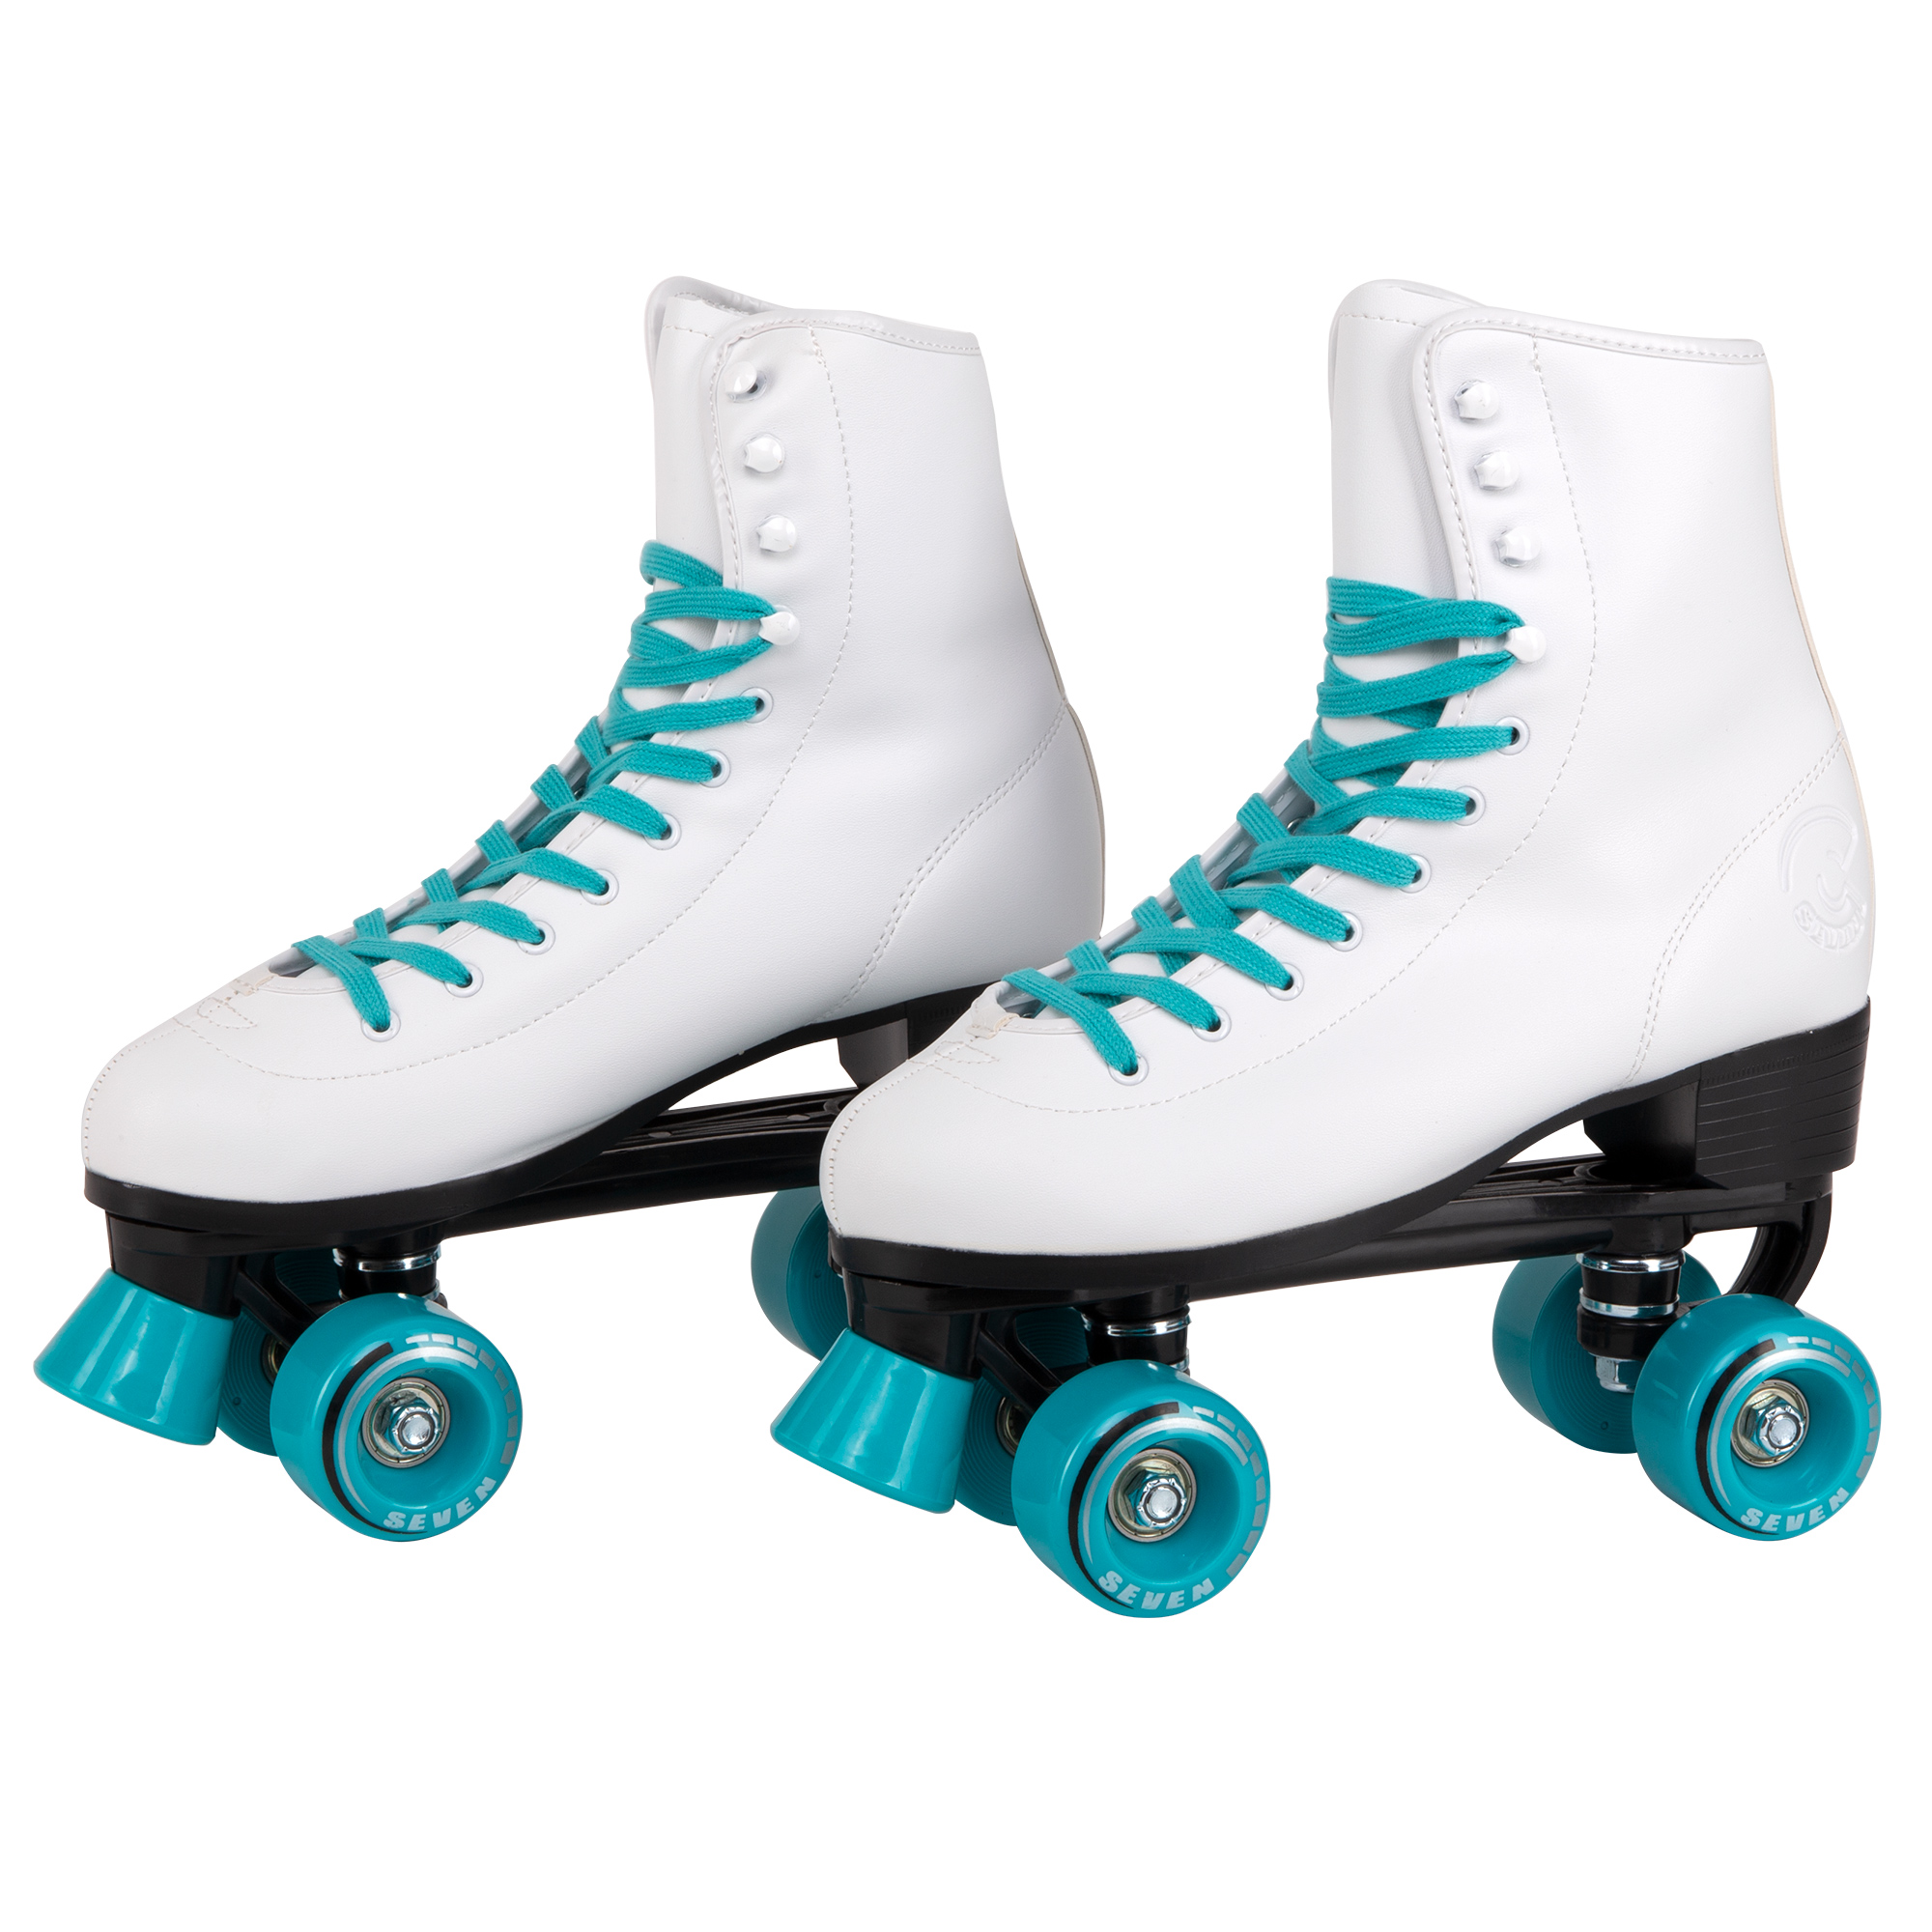 Womens Roller Skates Girls PU Leather High-top Roller Skate Flash Four-Wheel Roller Skates for Boys Men Adults Unisex with Carry Bag